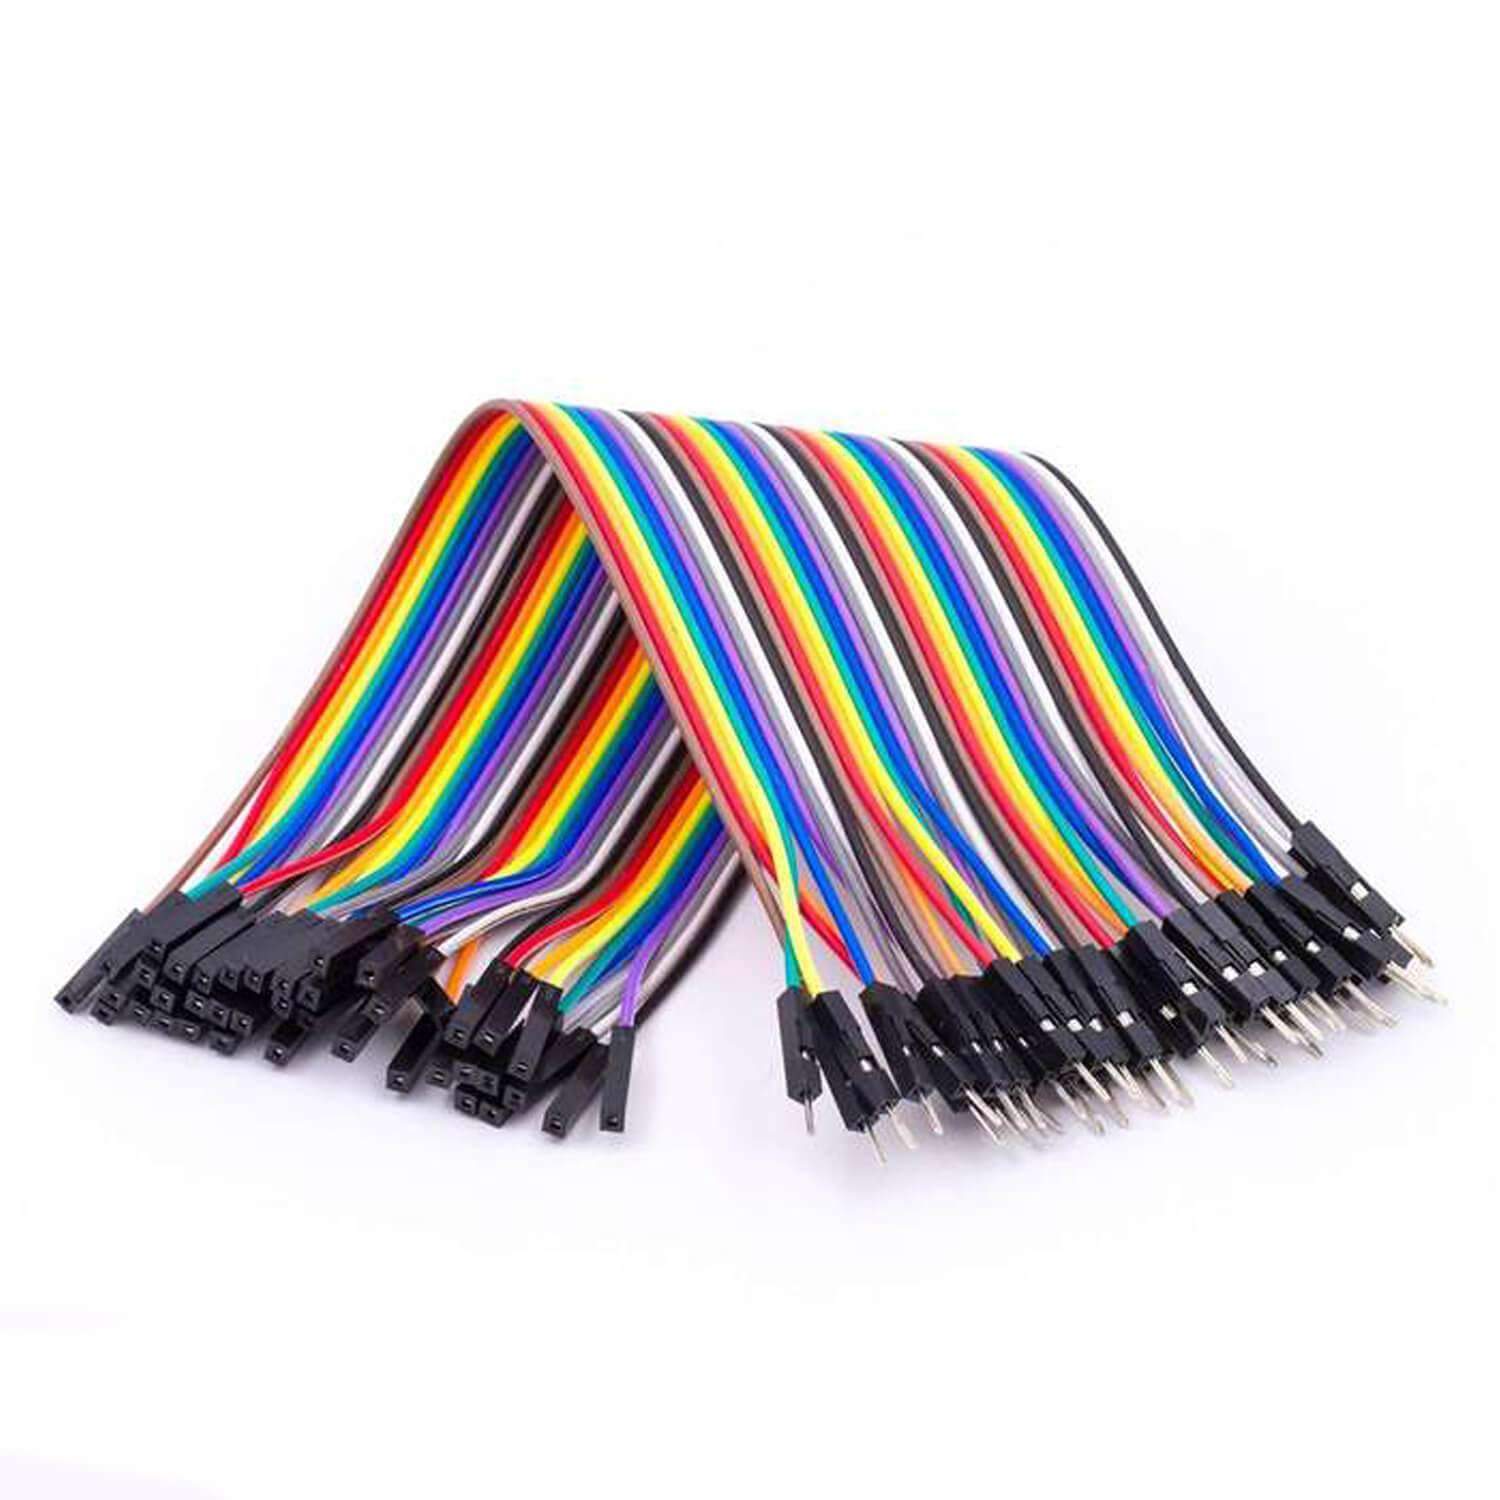 Jumper Wire Kabel 40 pc. 20 cm f2m female to male compatible with Arduino  and Raspberry Pi Breadboard